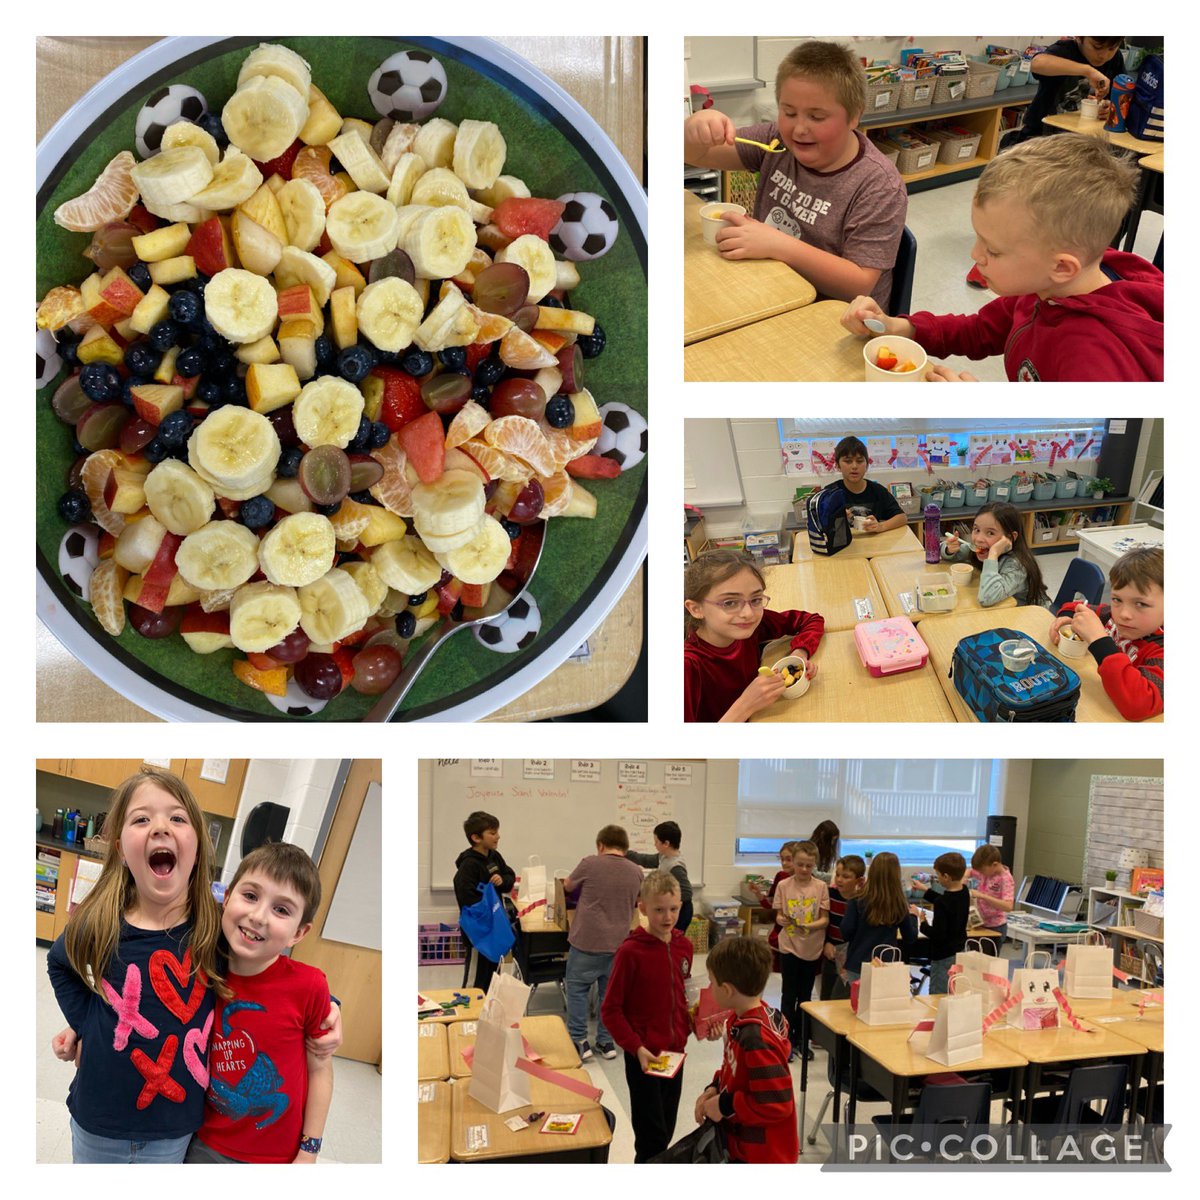 Our classroom was bursting with excitement as we made friendship salad to share and exchanged valentines @St_Peter_CES #healthyvalentines #StValentine